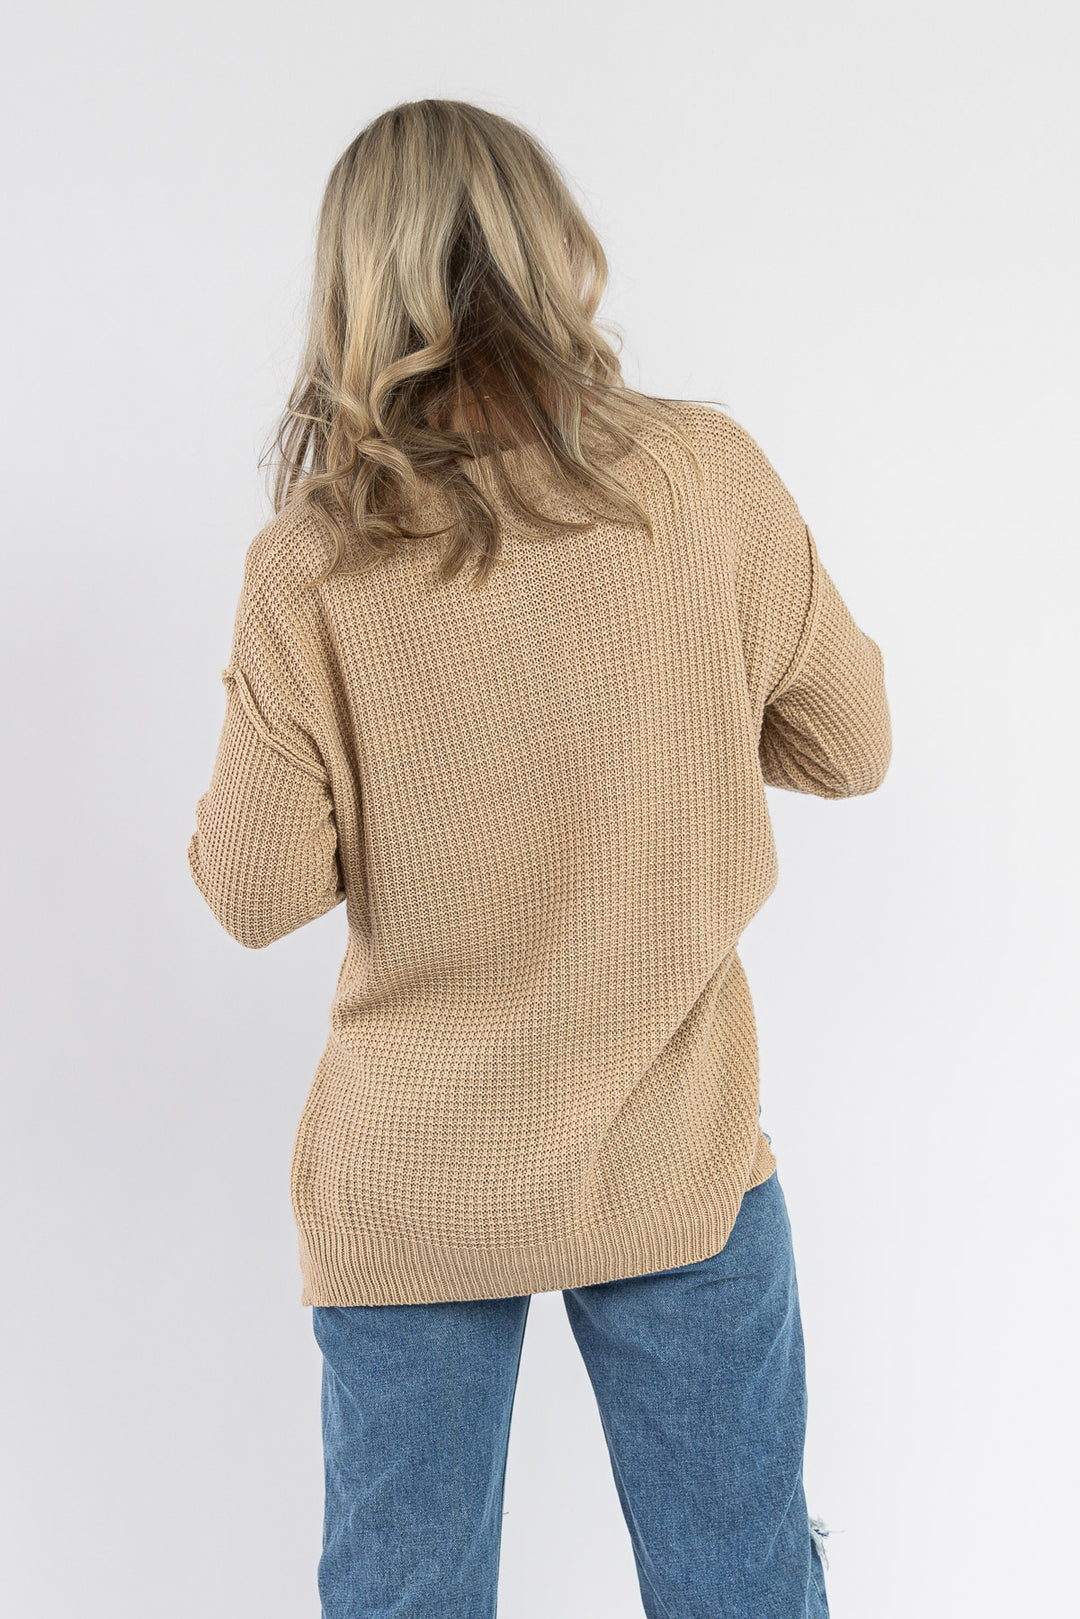 Sweater Weather Waffle Knit Top